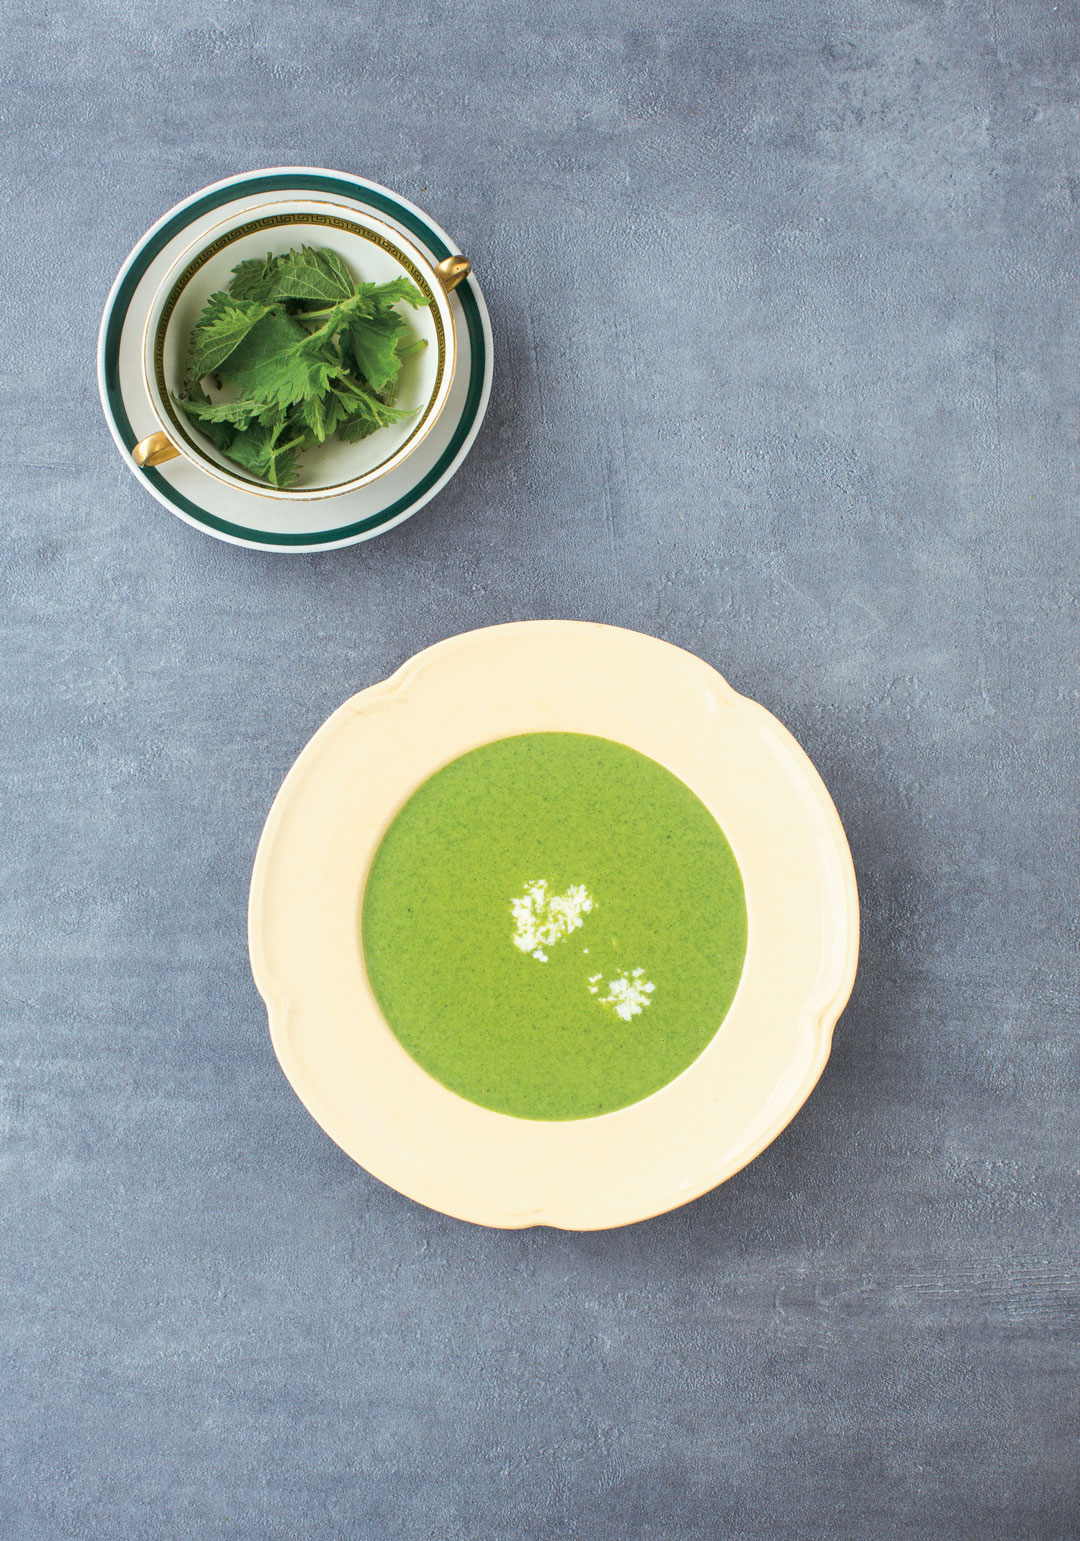 Nettle soup, from The Irish Cookbook